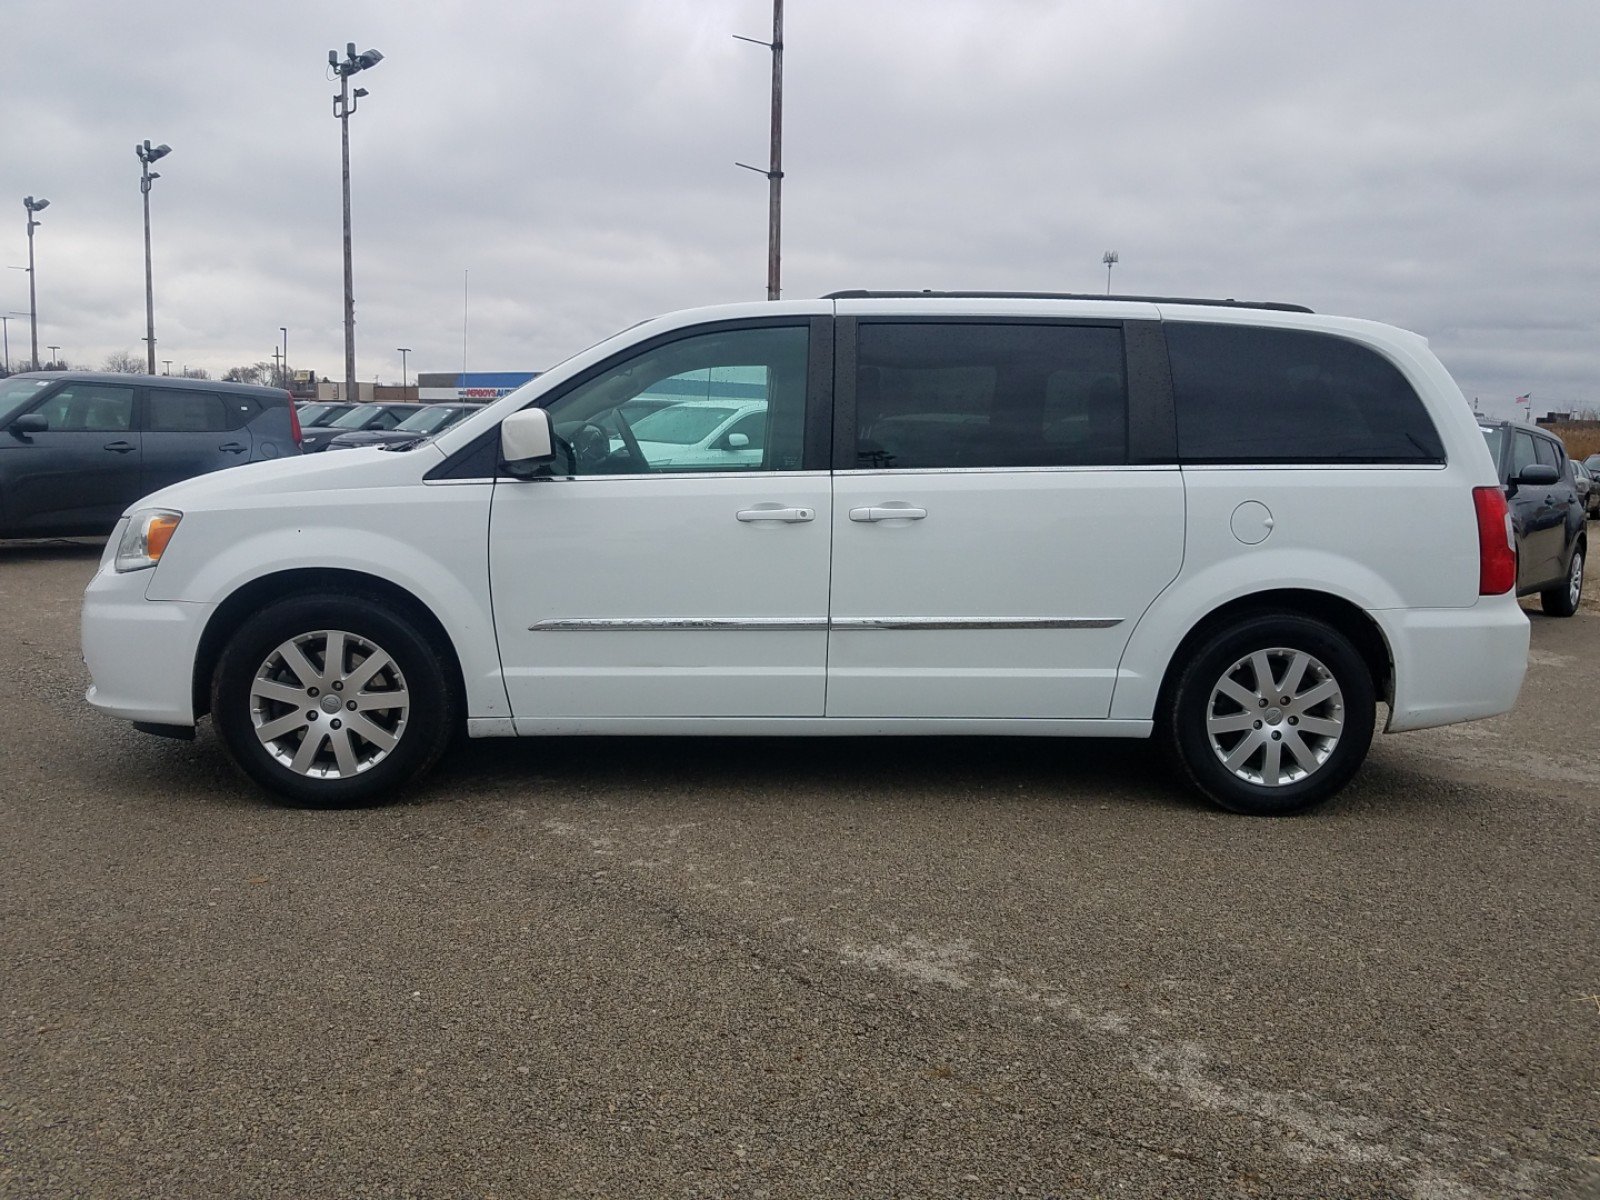 PreOwned 2015 Chrysler Town & Country Touring FWD Mini